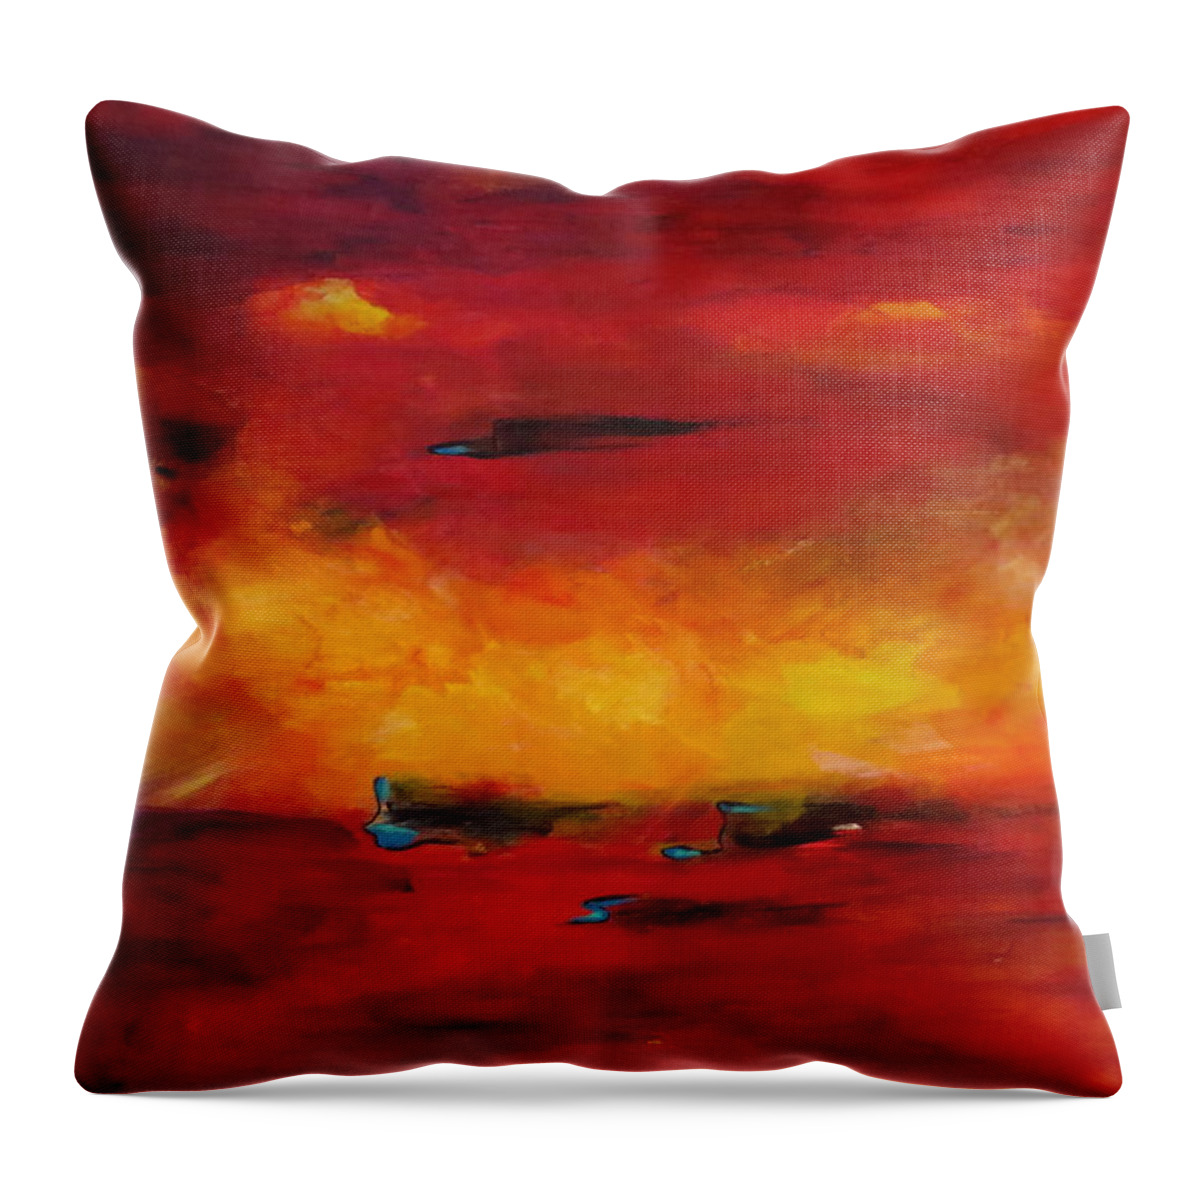 Large Throw Pillow featuring the painting Too Enthralled by Soraya Silvestri